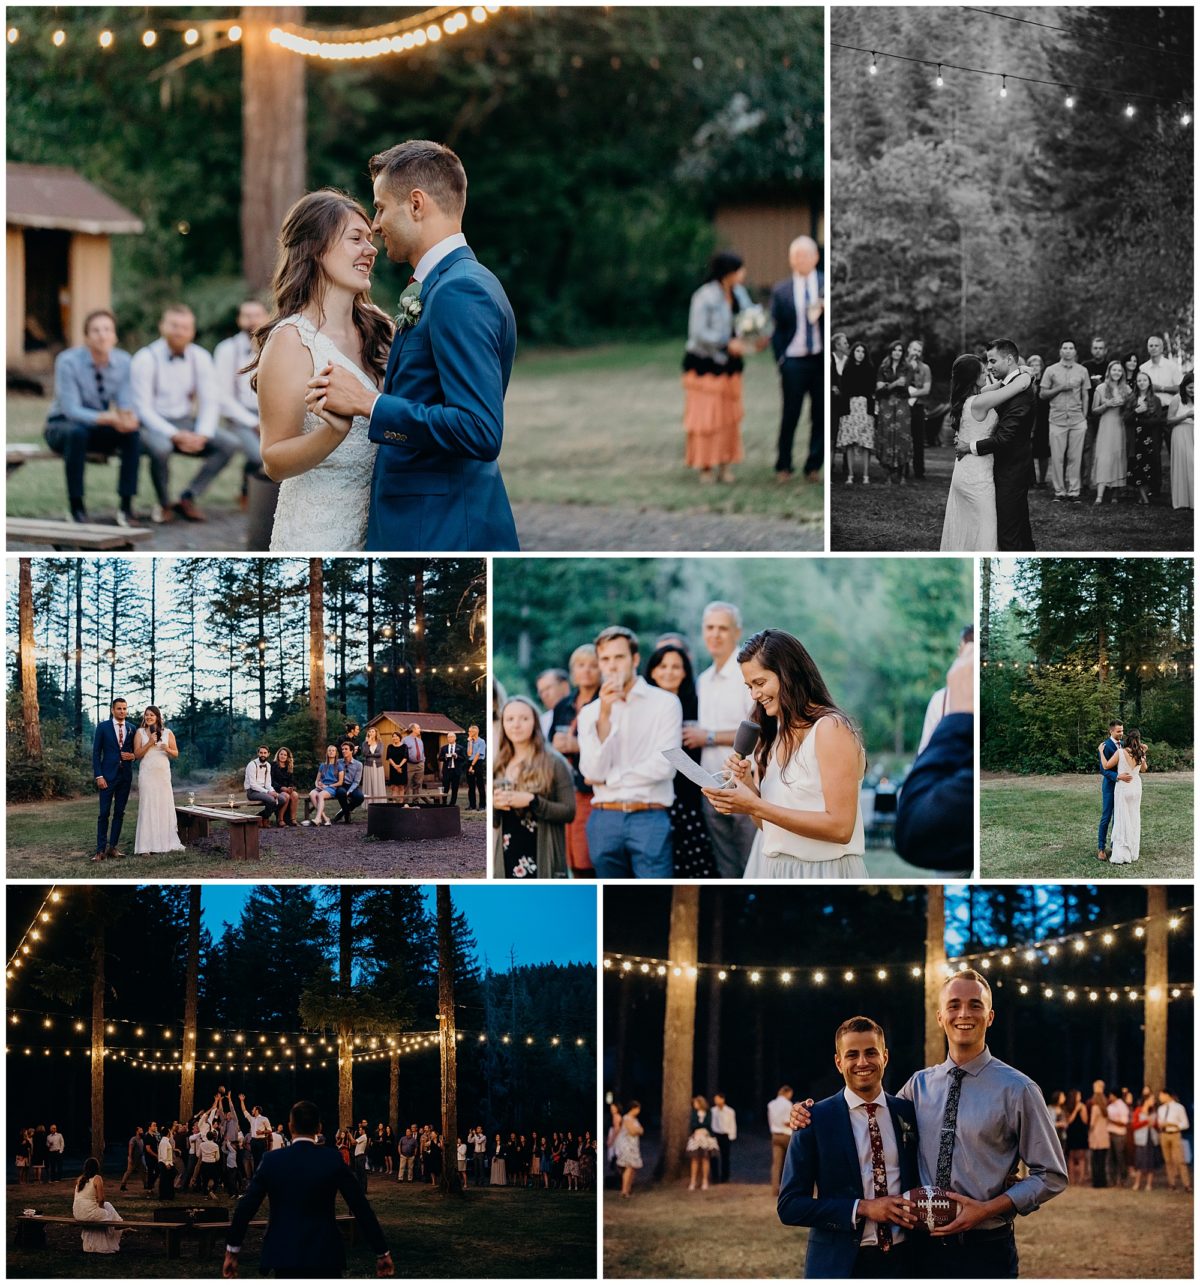 The first dance, speeches, and a garter toss at this camp themed wedding.